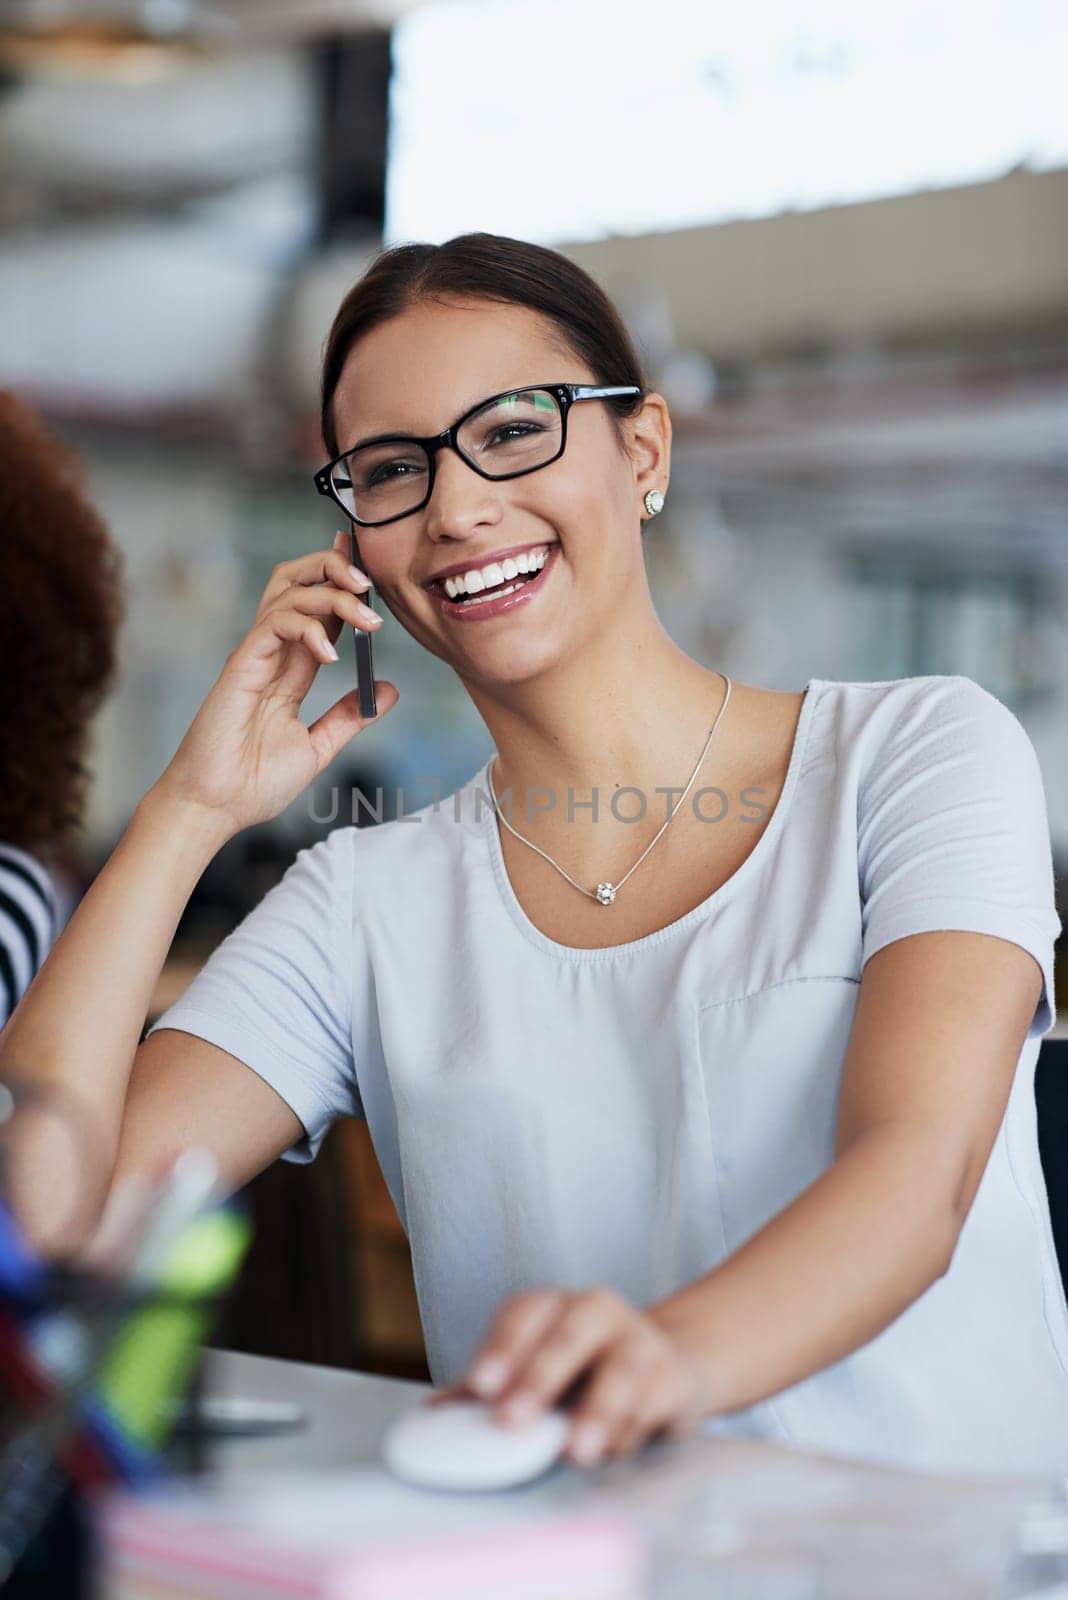 Office, phone call and woman with smile at desk for networking, communication and planning. Contact, discussion and journalist with smartphone at work for article review, feedback and good advice.